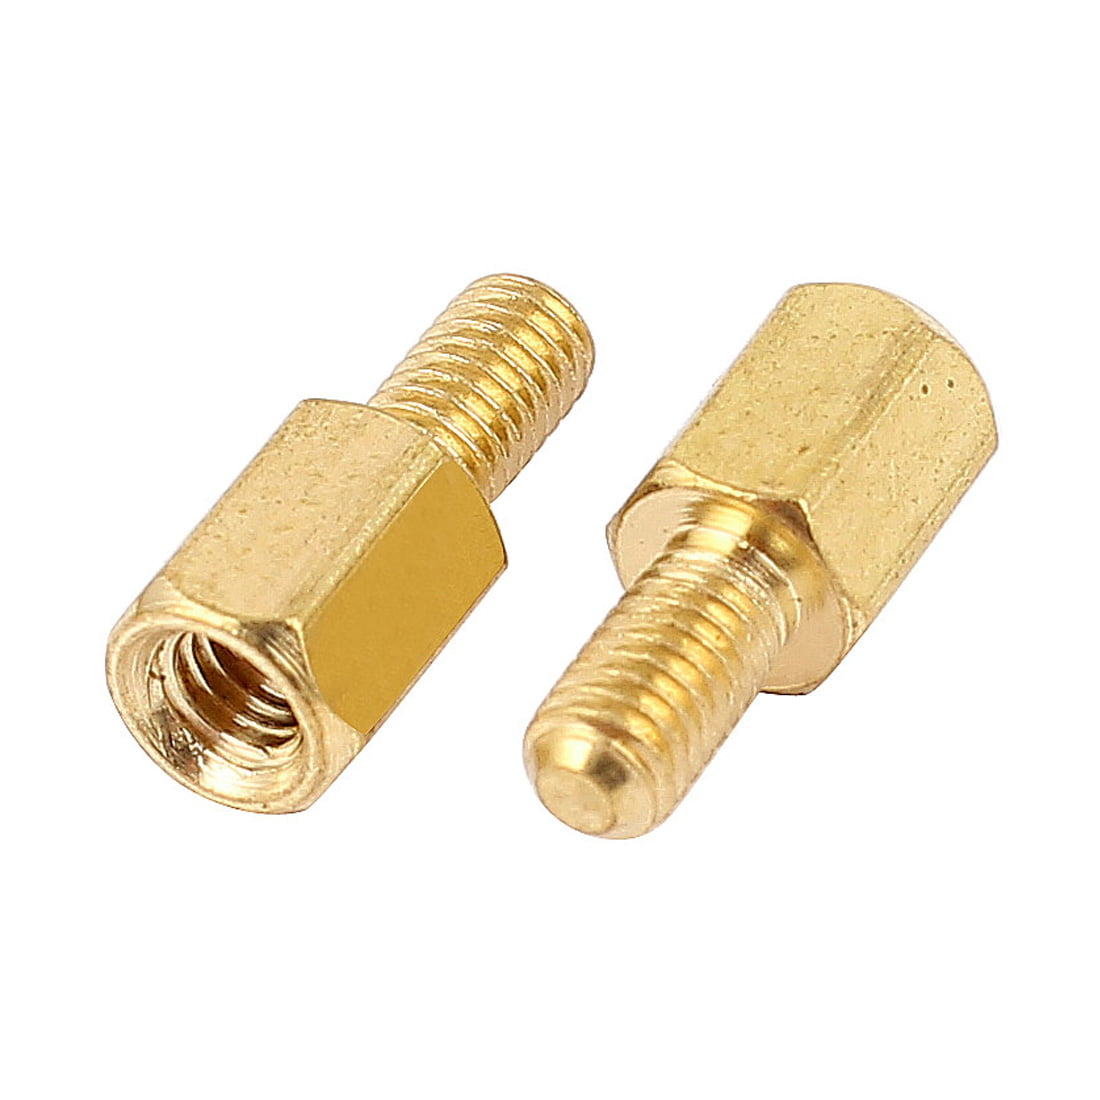 uxcell 20Pcs Brass Hex Standoff Spacer Screw Female to Male 20mm 6mm M4 4mm